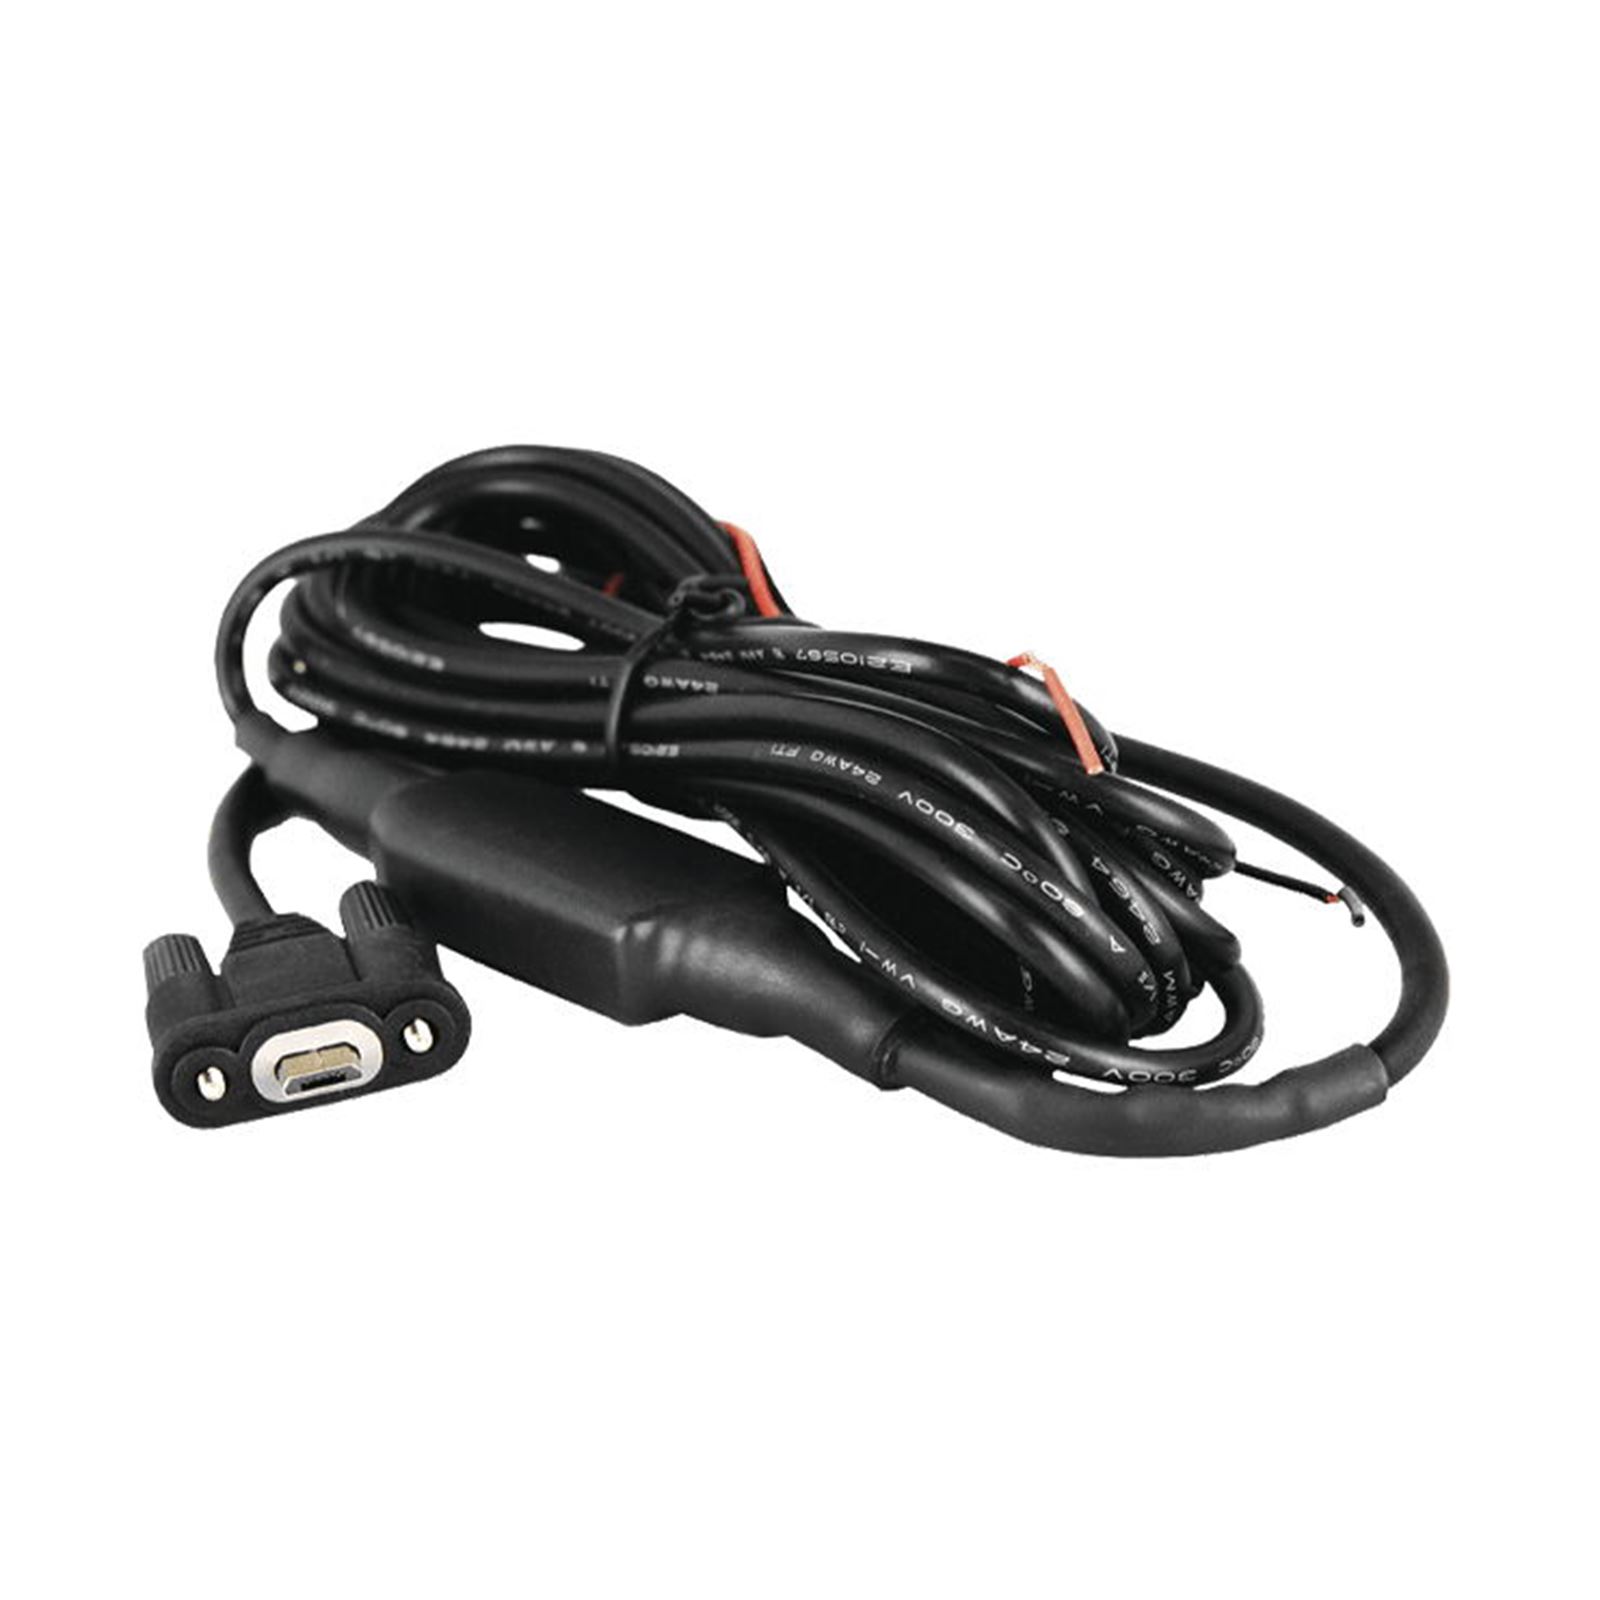 SPOT Trace Satellite Tracker Waterproof Cable - Motorcycle, ATV / UTV & Powersports Parts | The Best Powersports, Motorcycle, ATV & Snow Gear, and More